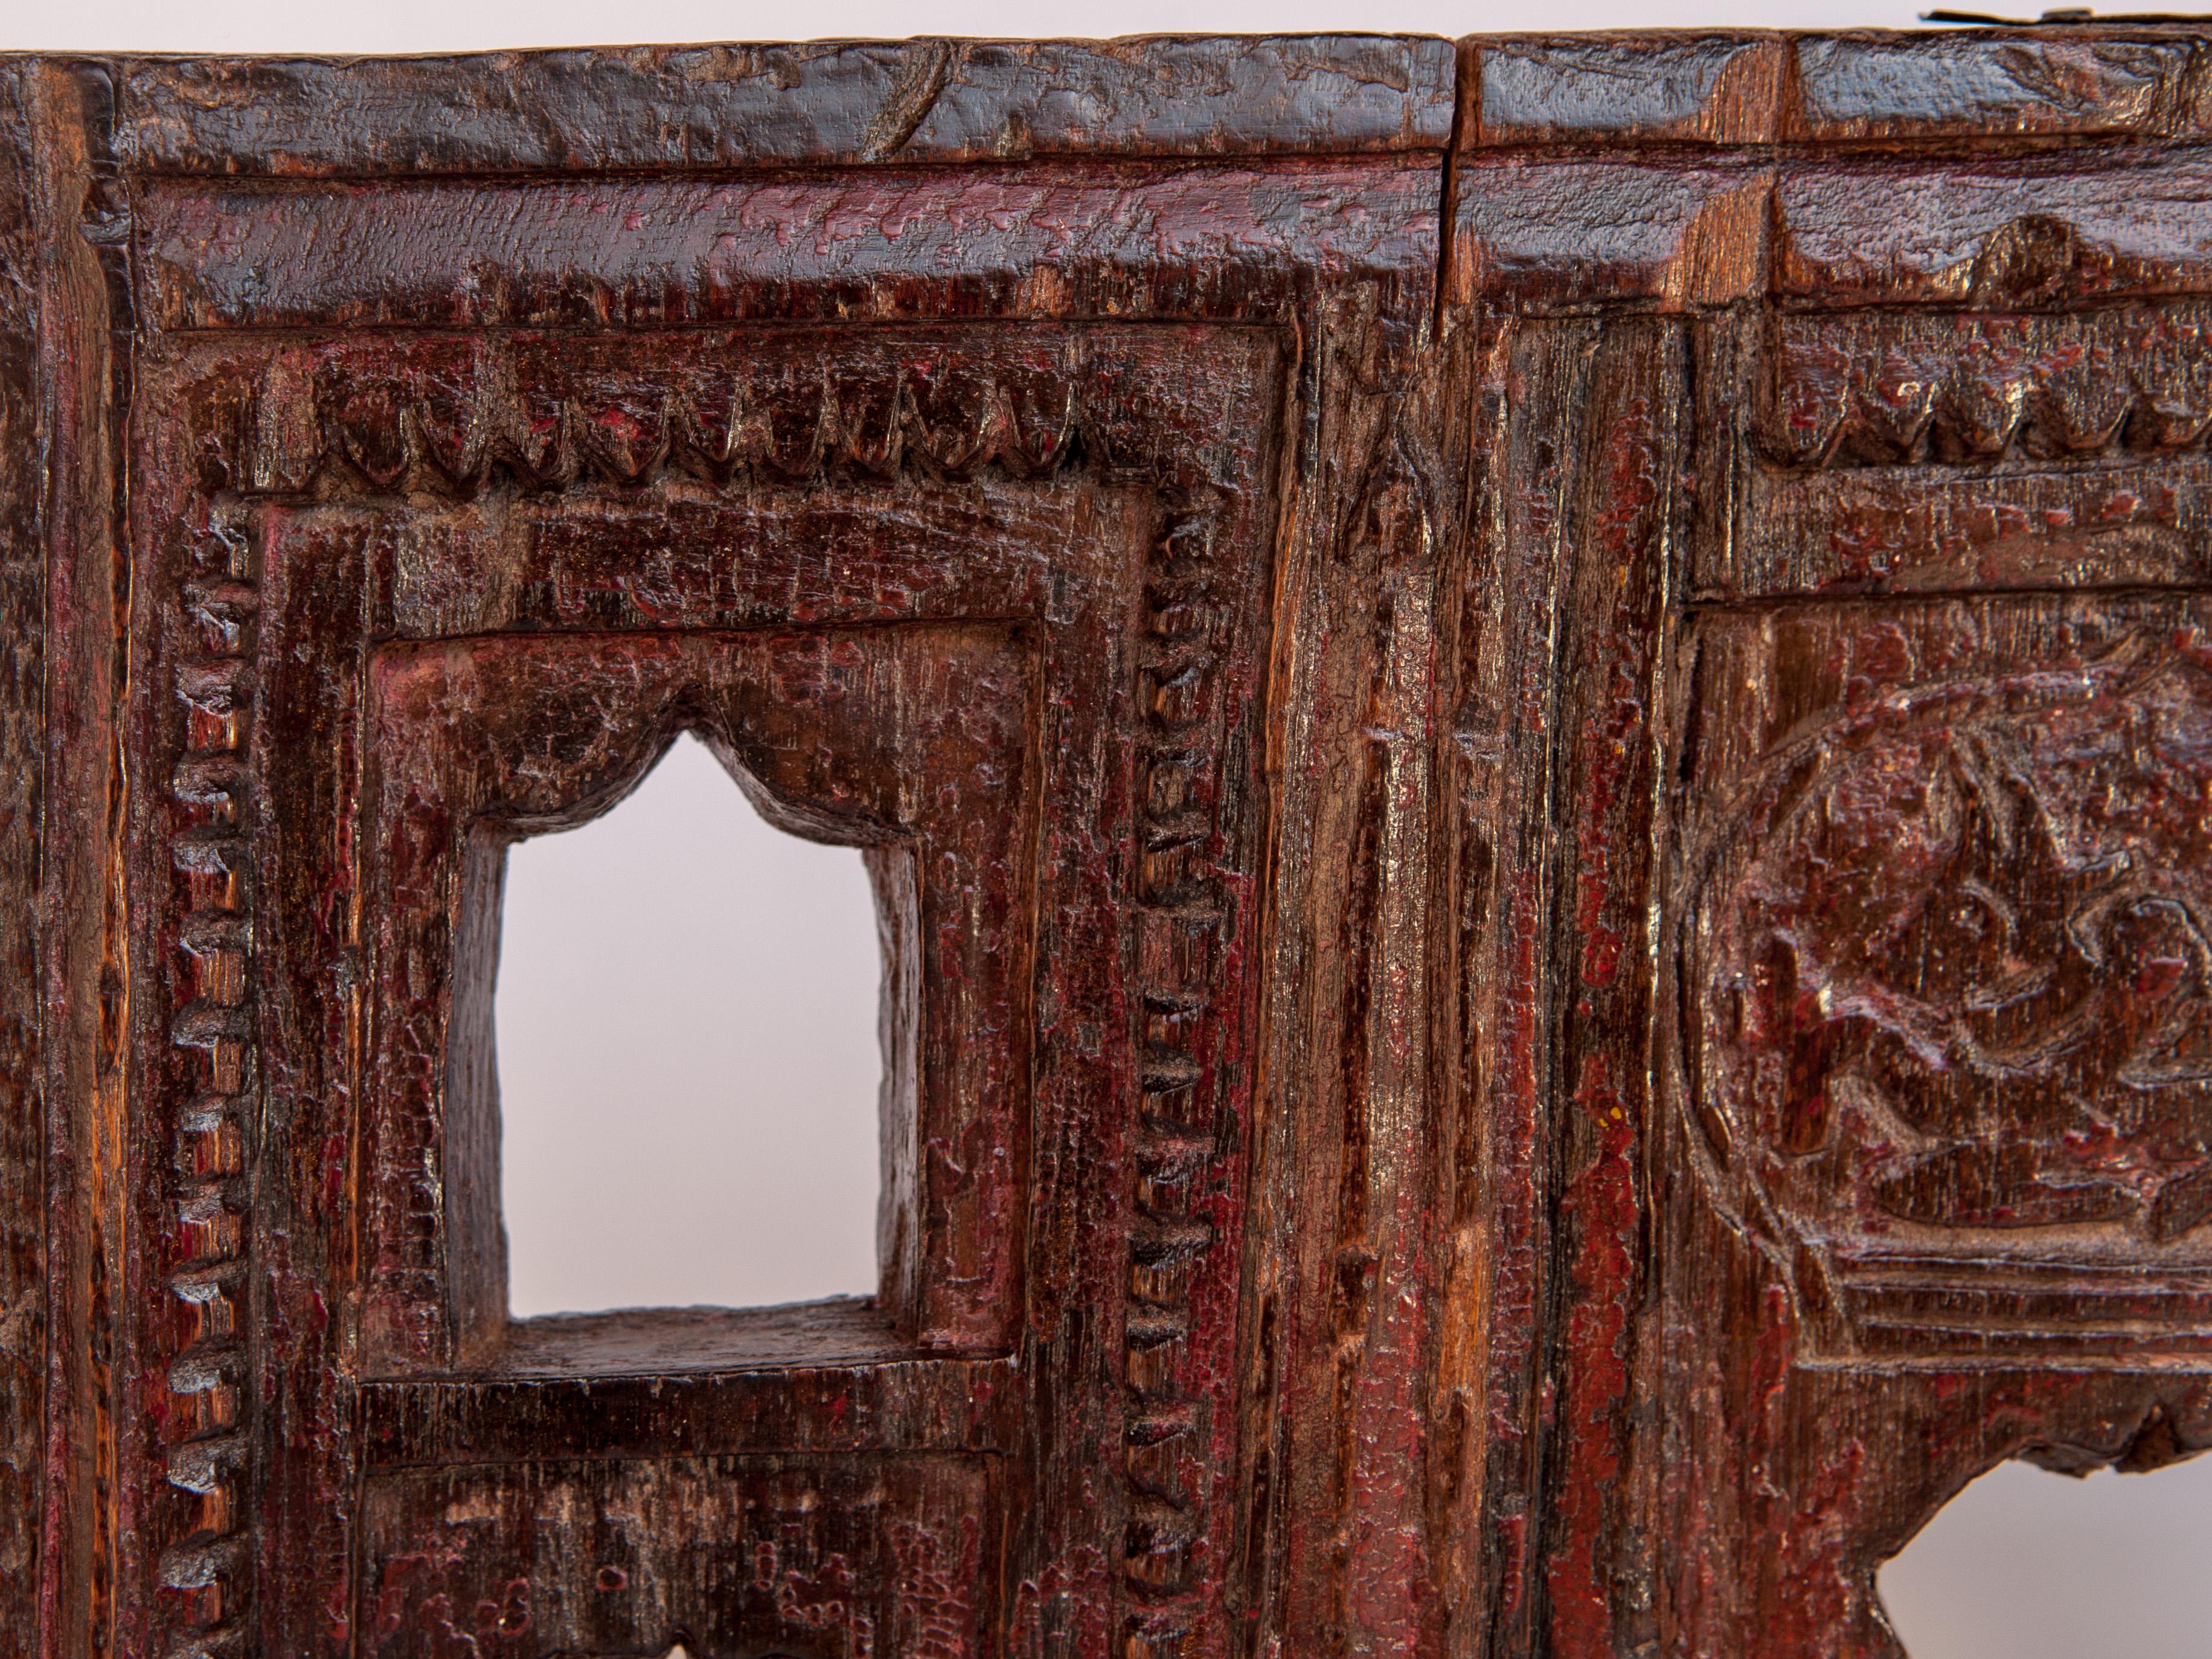 Vintage miniature architectural votive or picture frame, mid-20th century, India. Wooden, Hand carved. Measures: 18 wide x 12.25 high.
This vintage hand carved wooden frame, from India, is basically a rustic architectural rendering of a house